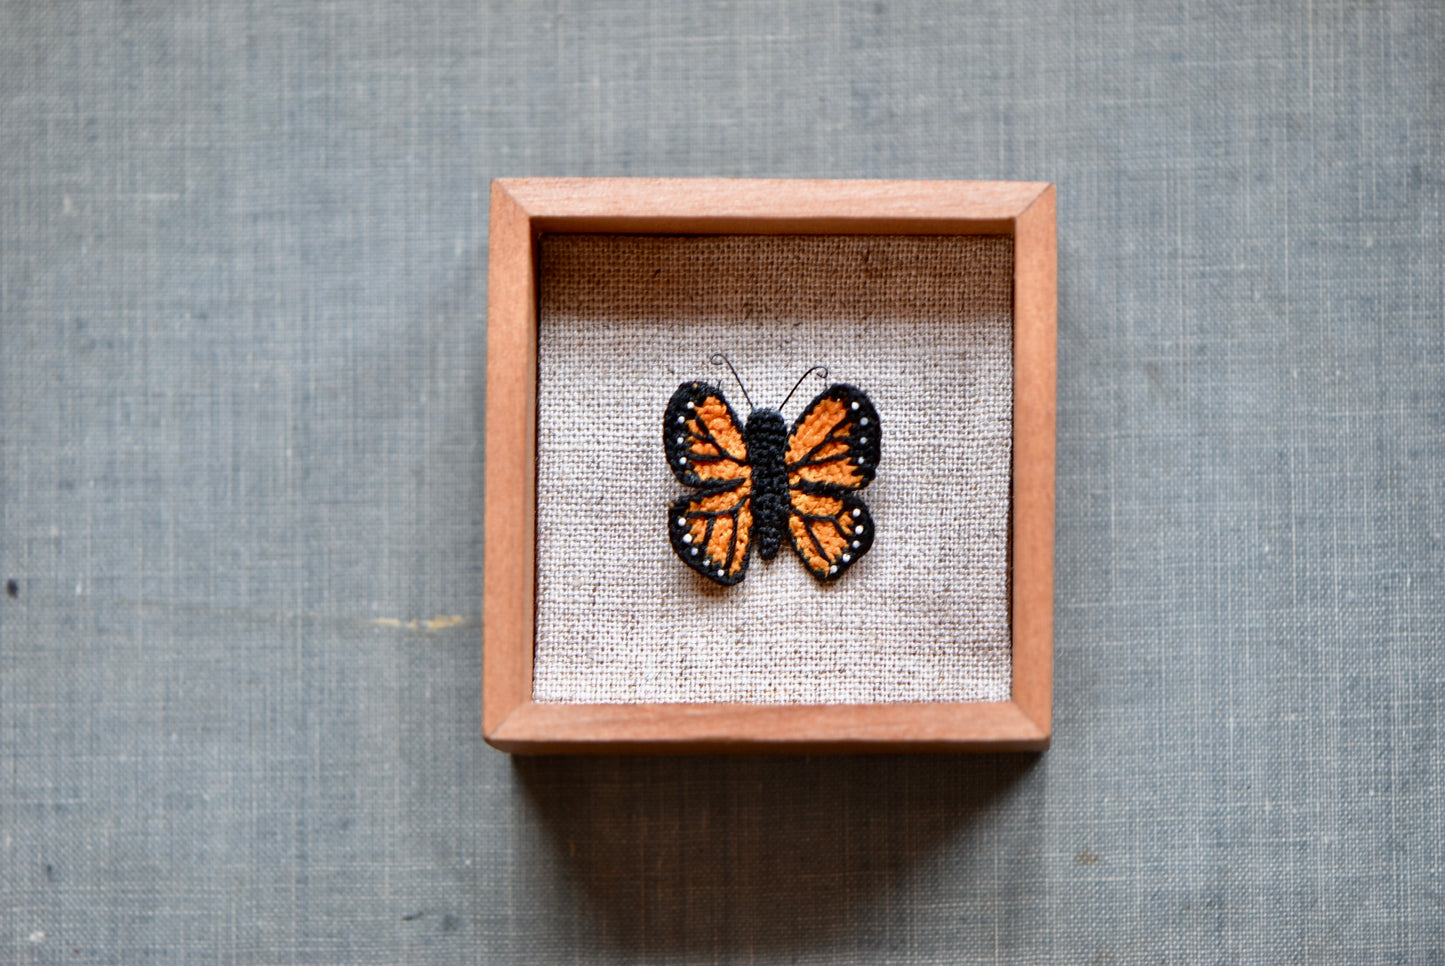 Crocheted Tiny Butterfly - OOAK - Collaboration with Tinybellsoftheprairy